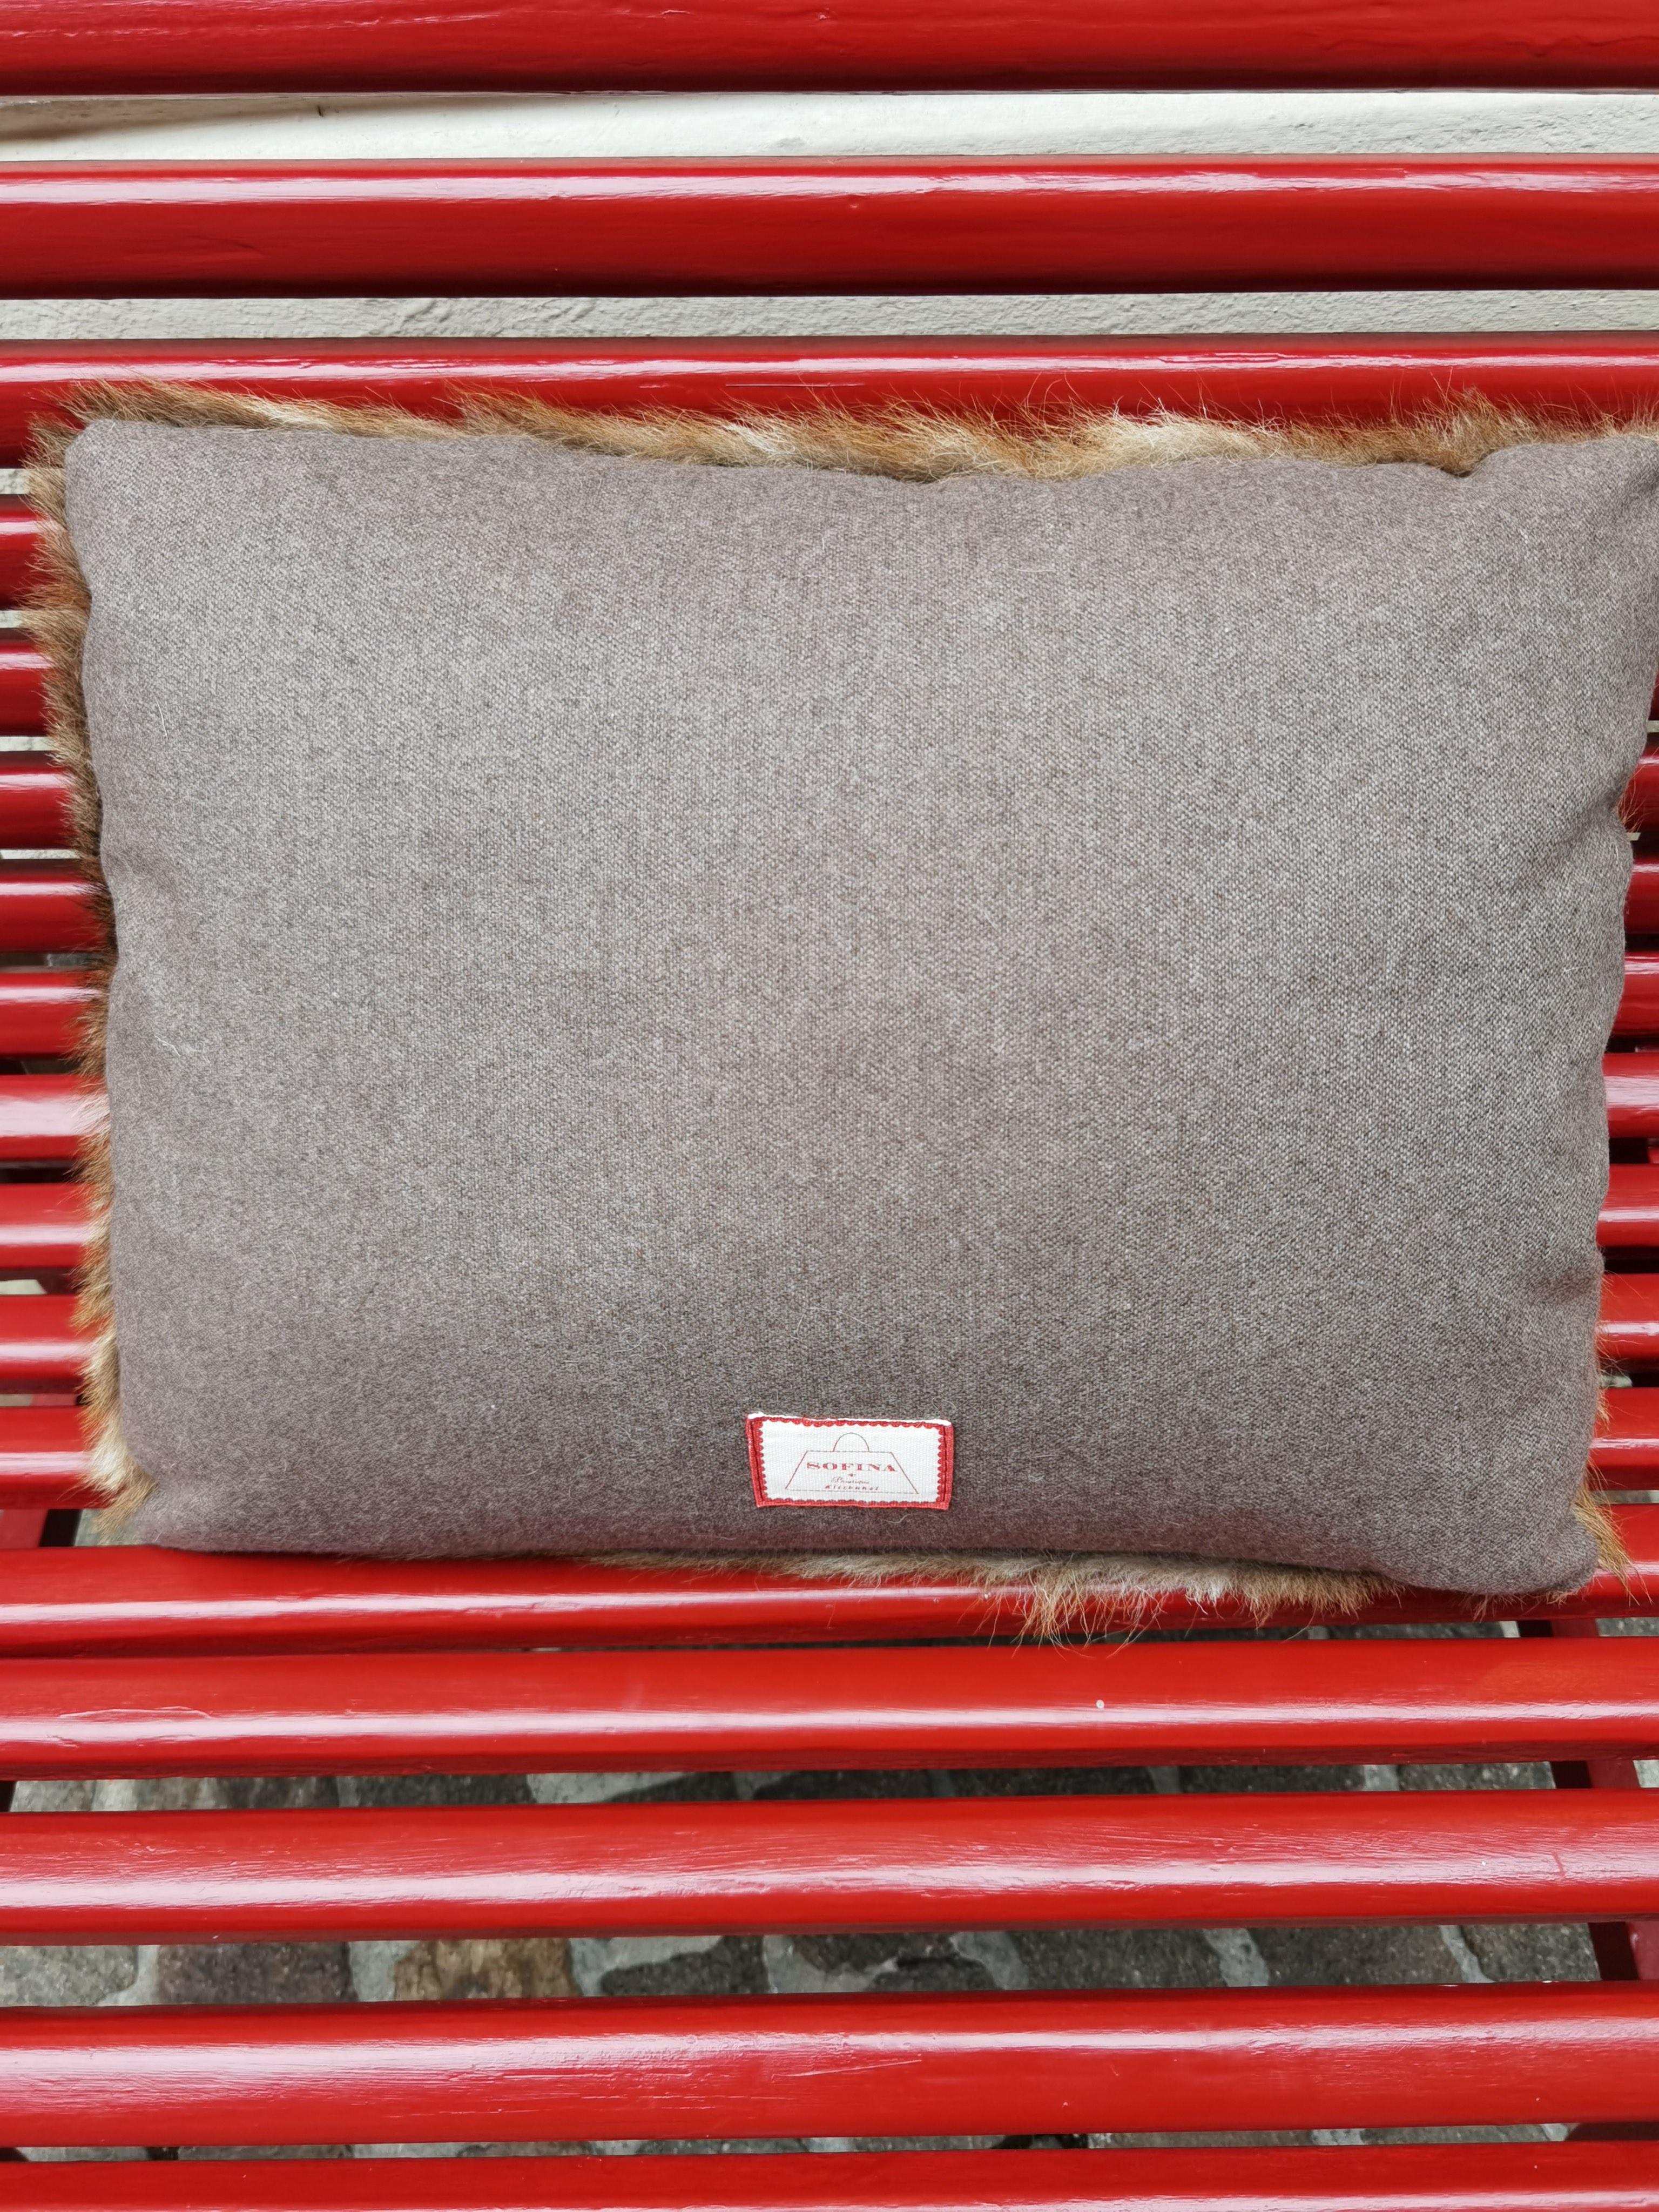 Cushion red deer fur with white spots. Backside grey wool.
The fur comes from the Kitzbuehel alps. Made in Kitzbühel, Austria.